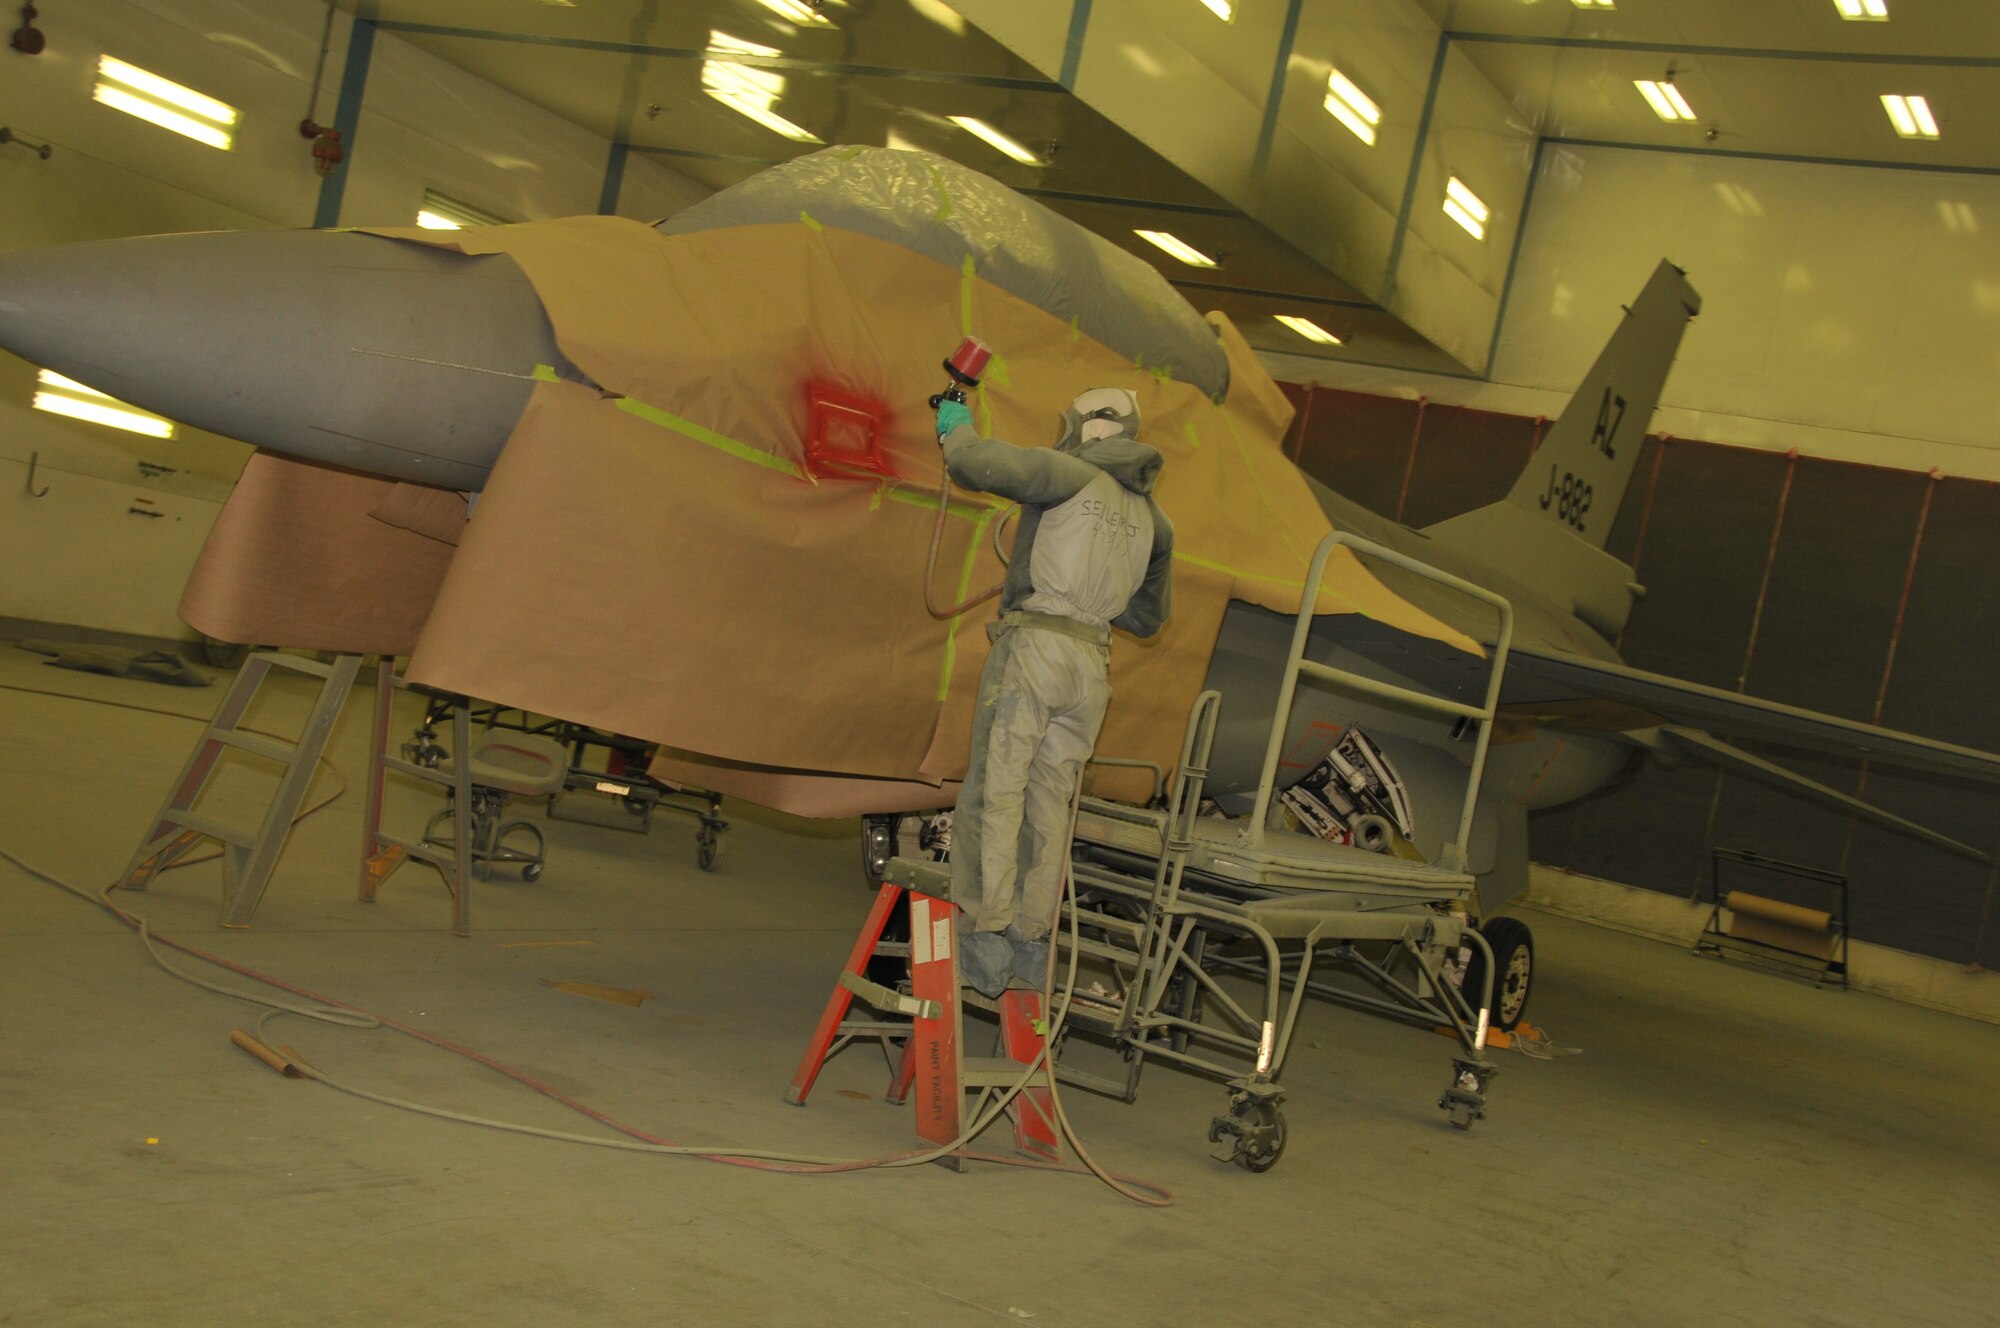 James Seiler, a painter from the Iowa Air National Guard Paint Facility, Sioux City, Iowa,  provides the finishing touches to an F-16 from the Royal Netherlands Air Force. This is the first time the paint facility has worked with an international aircraft. The facility will service six Dutch F-16s in 2012. 

USAF Photo Staff Sgt. Rich Murphy, 185th Air Refueling Wing, Iowa Air National Guard (released) 